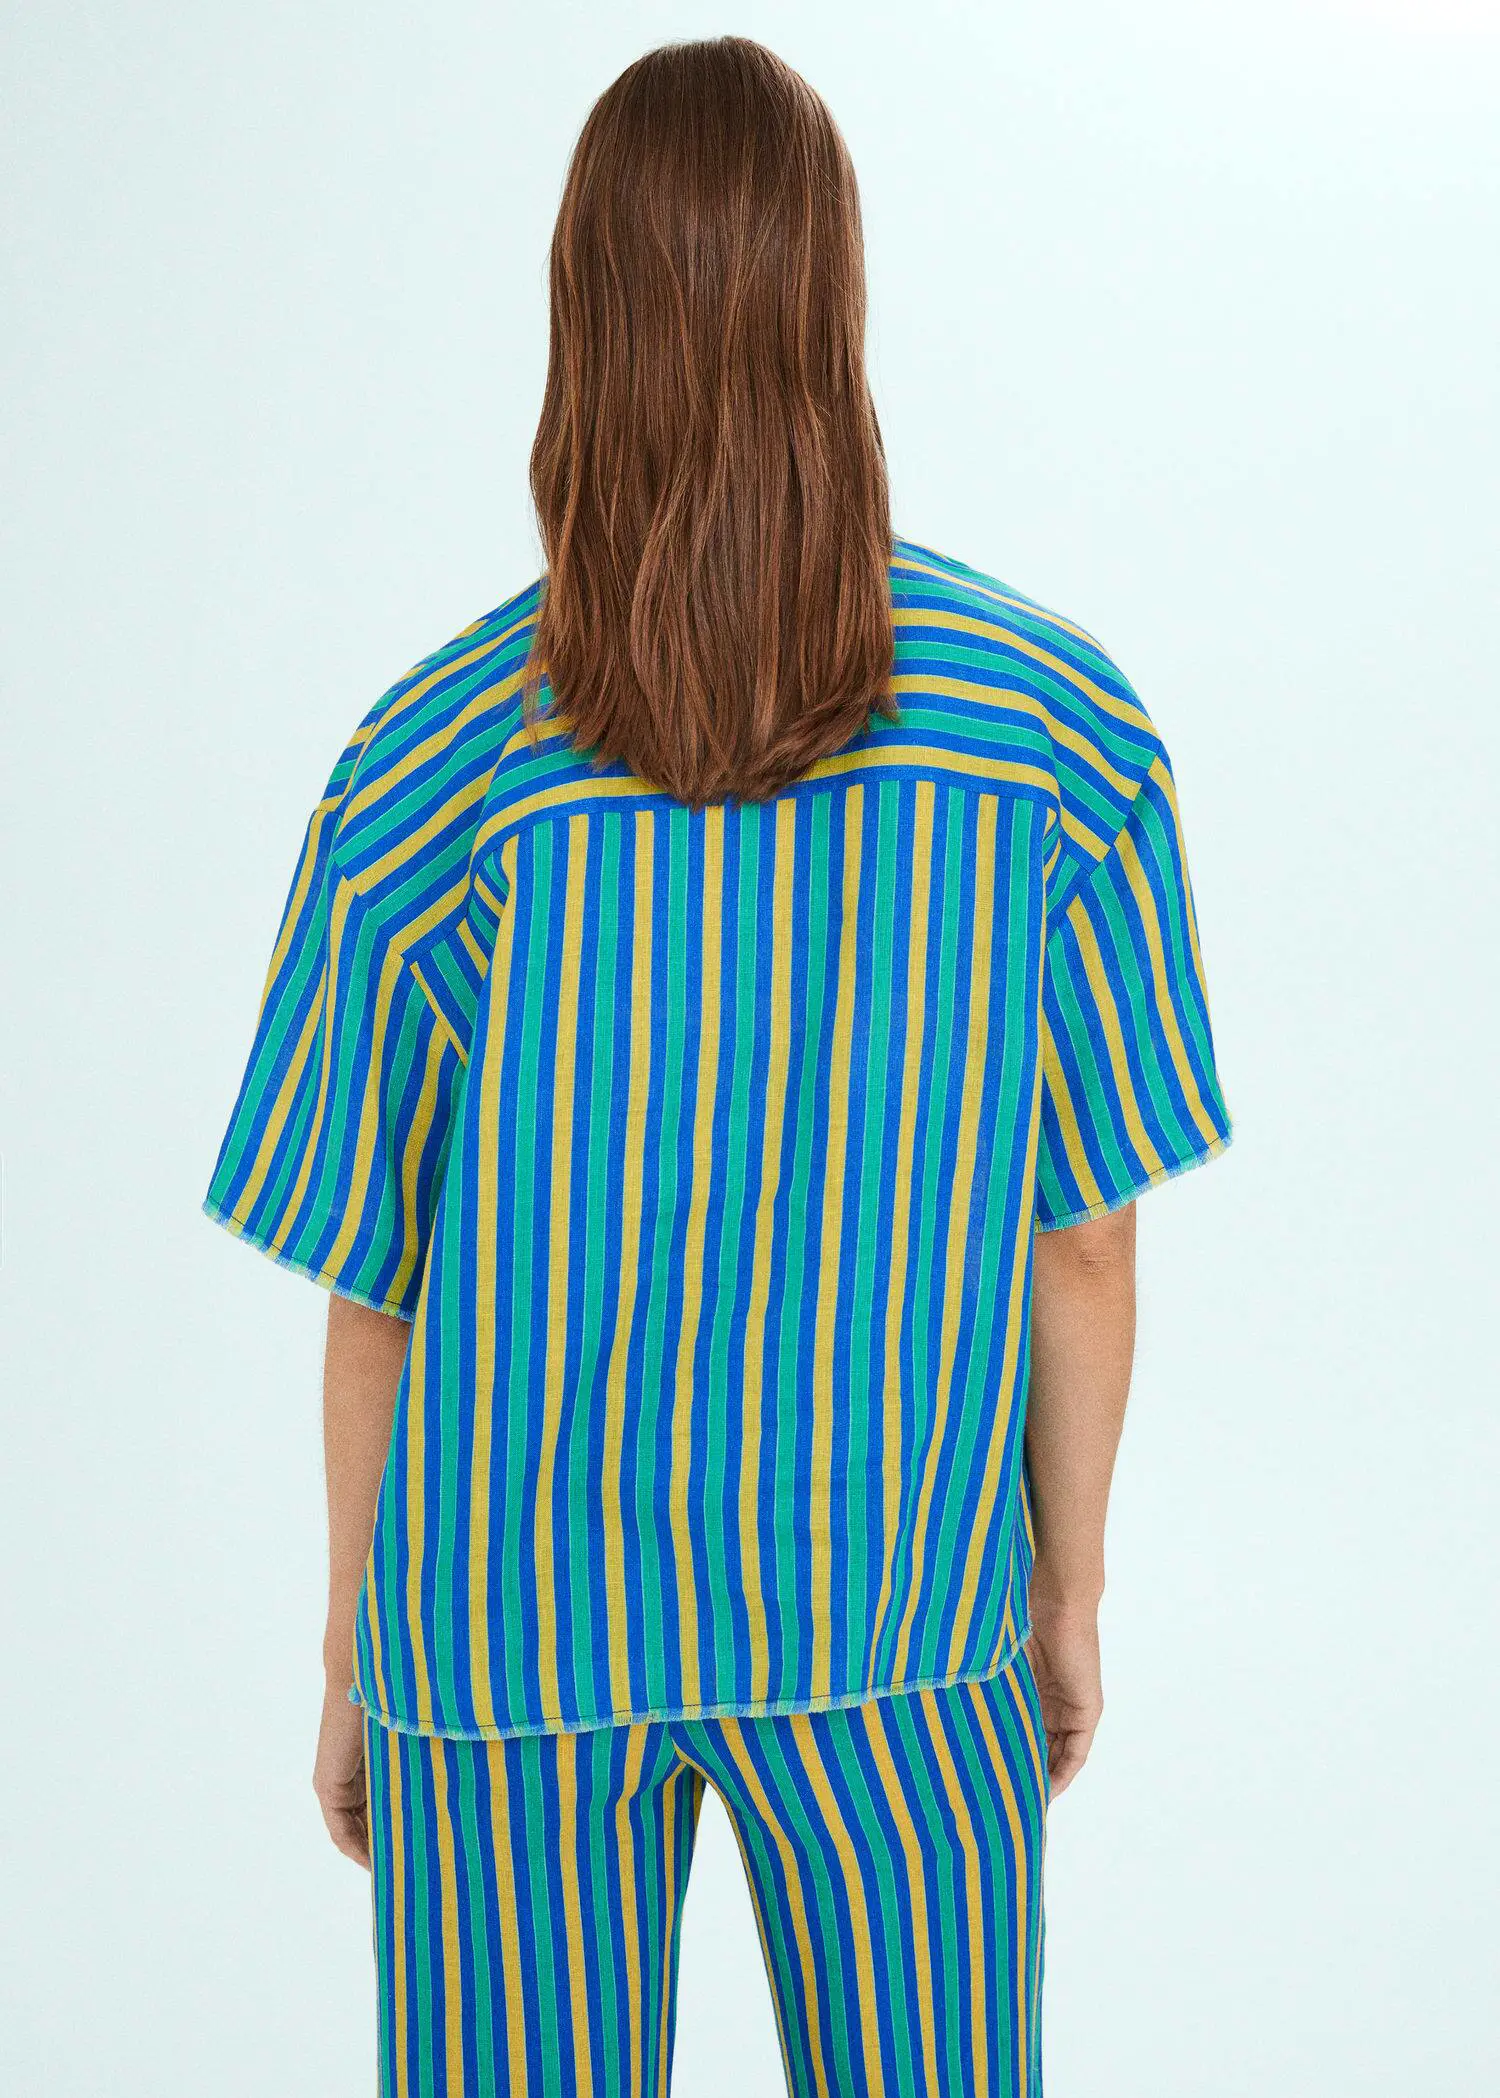 Mango Multi-coloured striped linen shirt. a person with long brown hair wearing a blue and yellow shirt. 